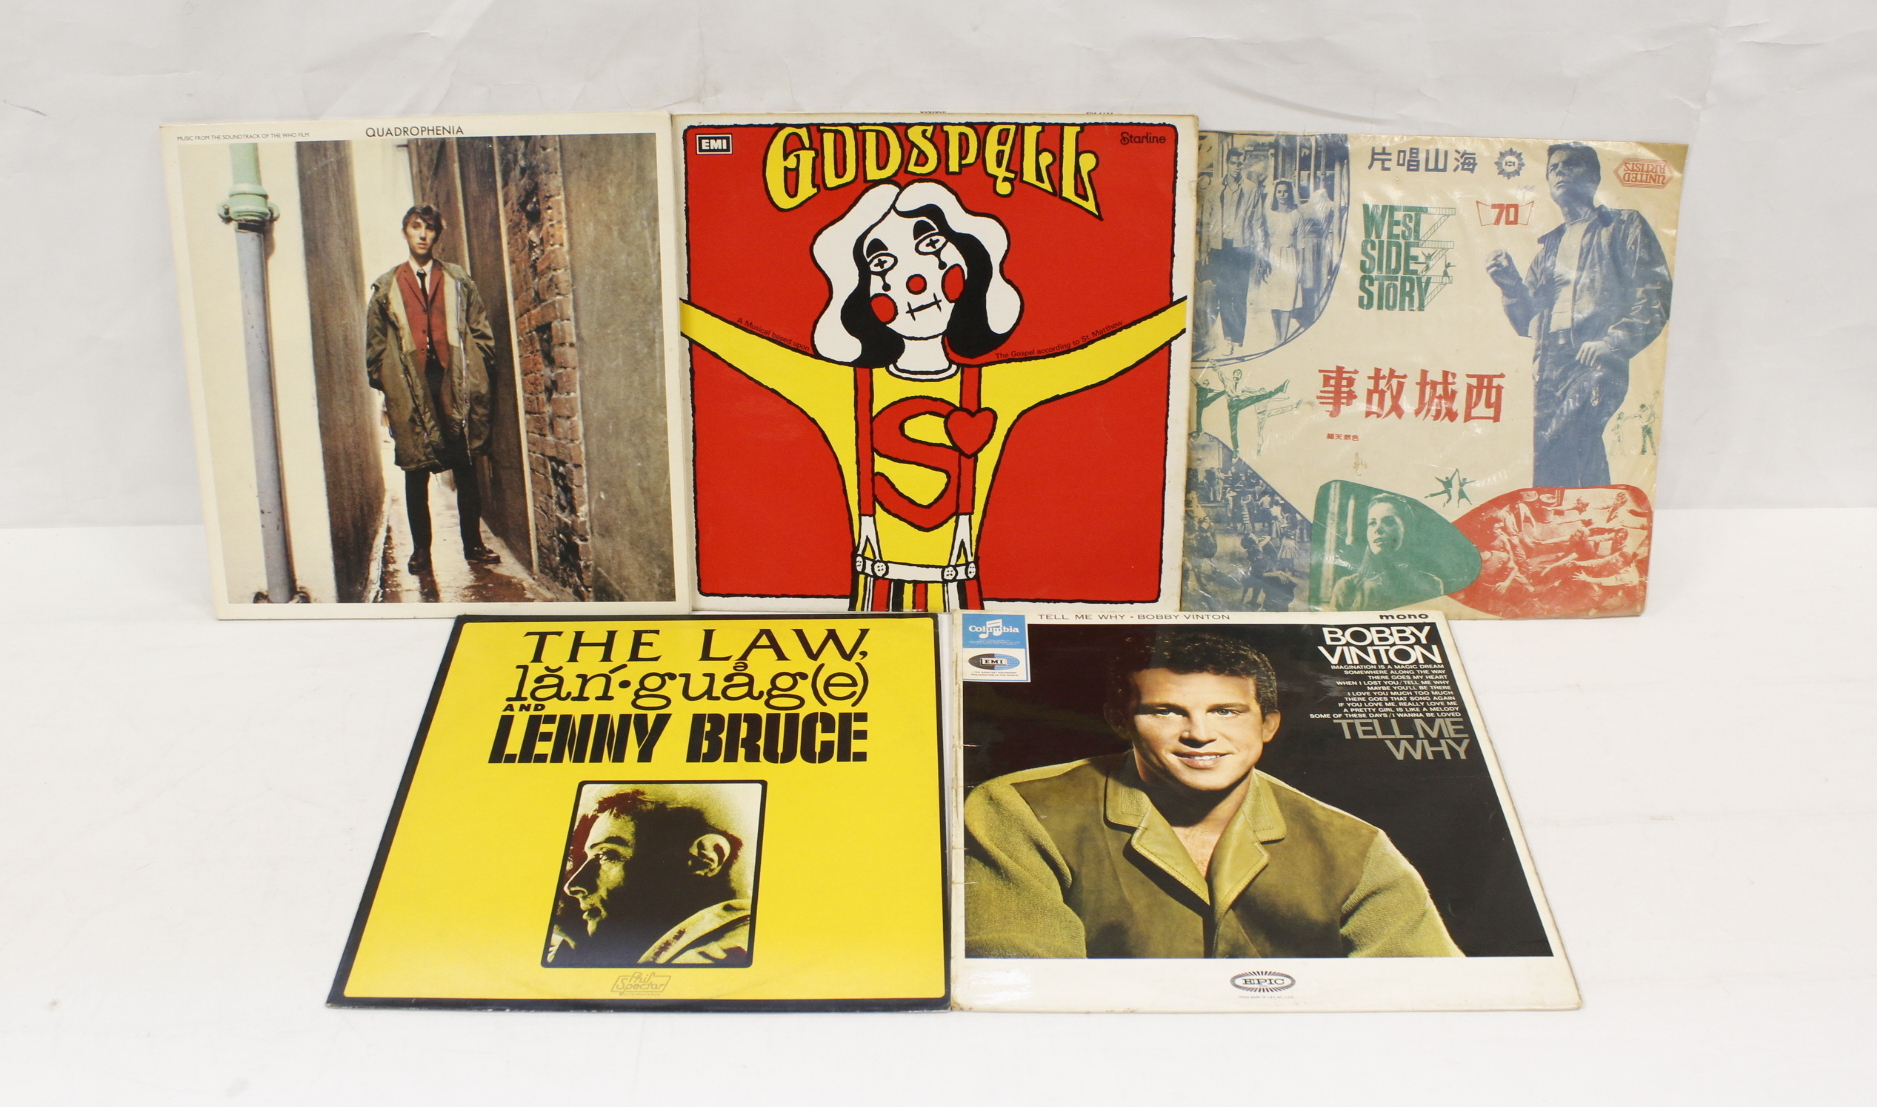 Collection of mainly 1960s and film related records to include Gold, Bobby Vinton, Buddy Rich, The